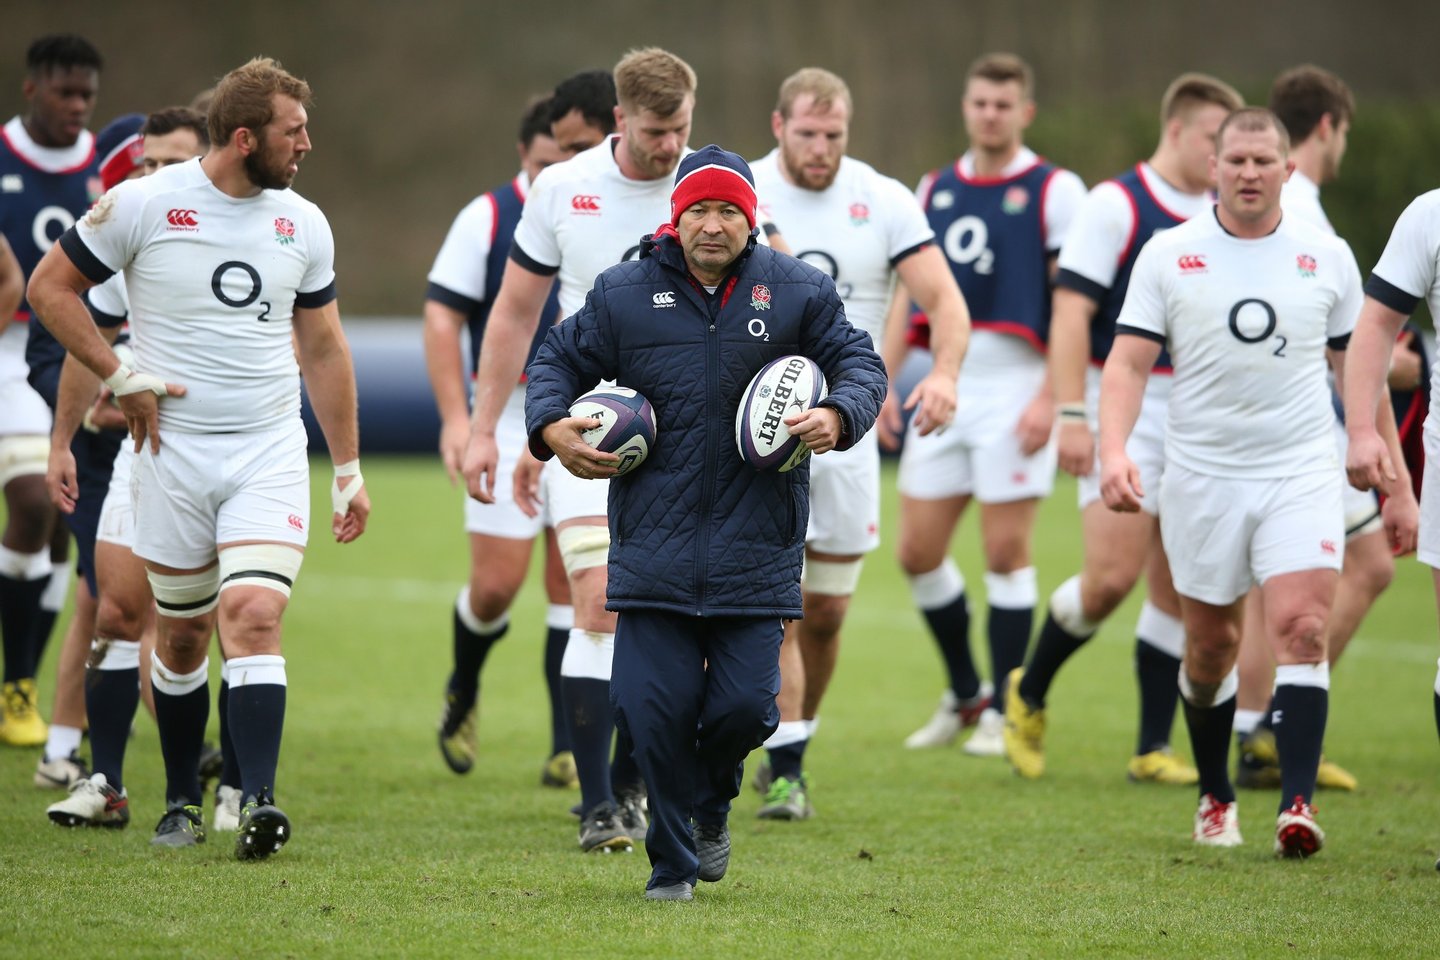 BAGSHOT, ENGLAND - FEBRUARY 04: Eddie Jones, the England head coach, looks on during the England training session held at Pennyhill Park on February 4, 2016 in Bagshot, England. (Photo by David Rogers/Getty Images)